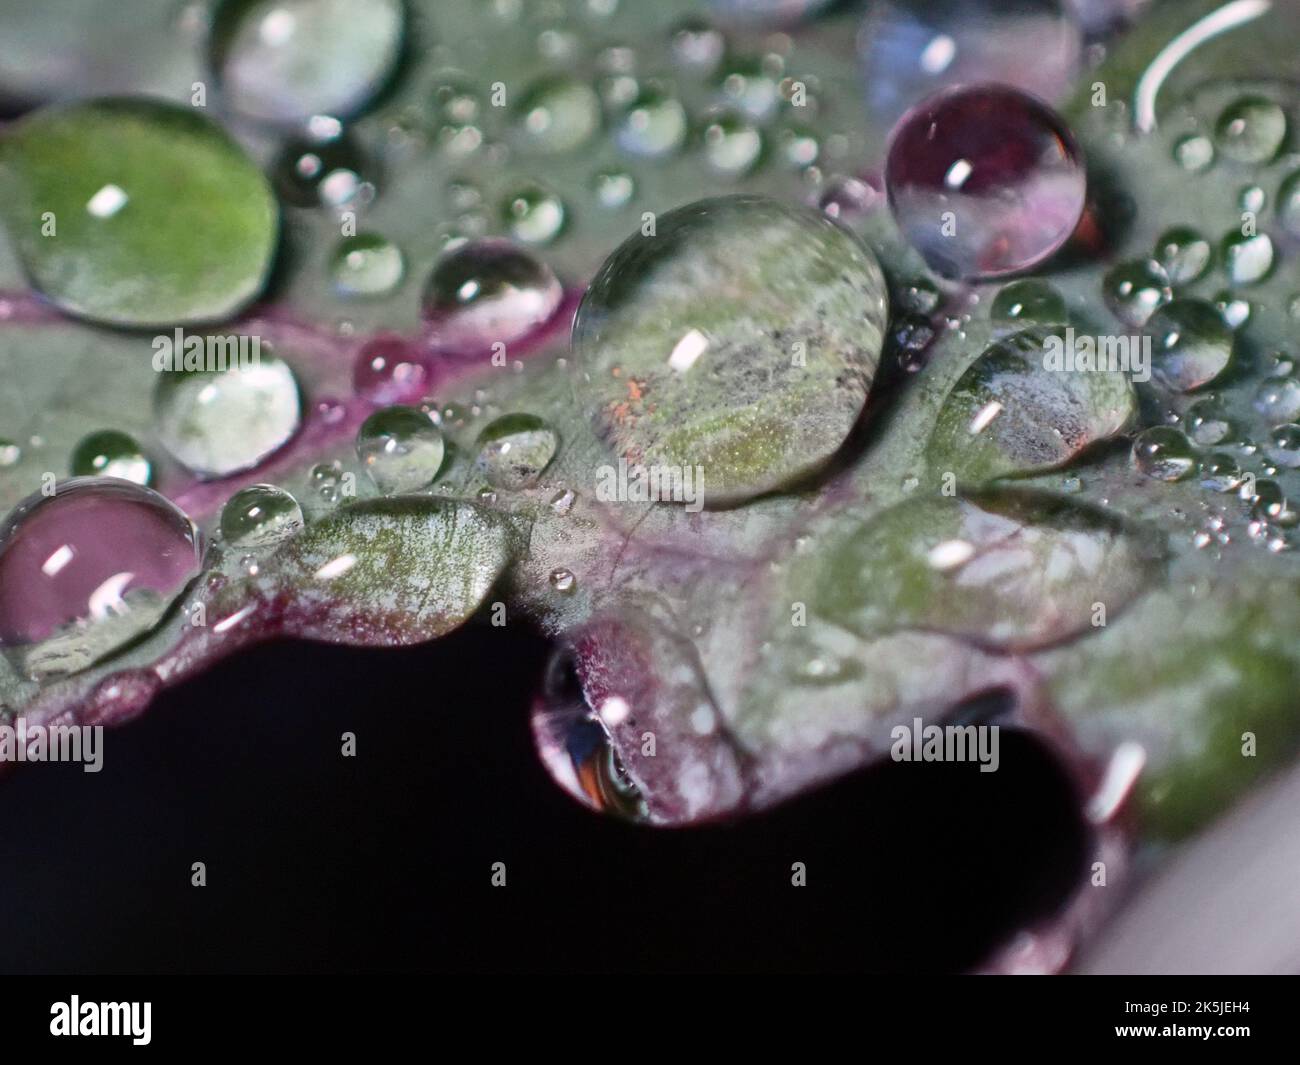 Large water drops in autumn on Kale leaves Stock Photo